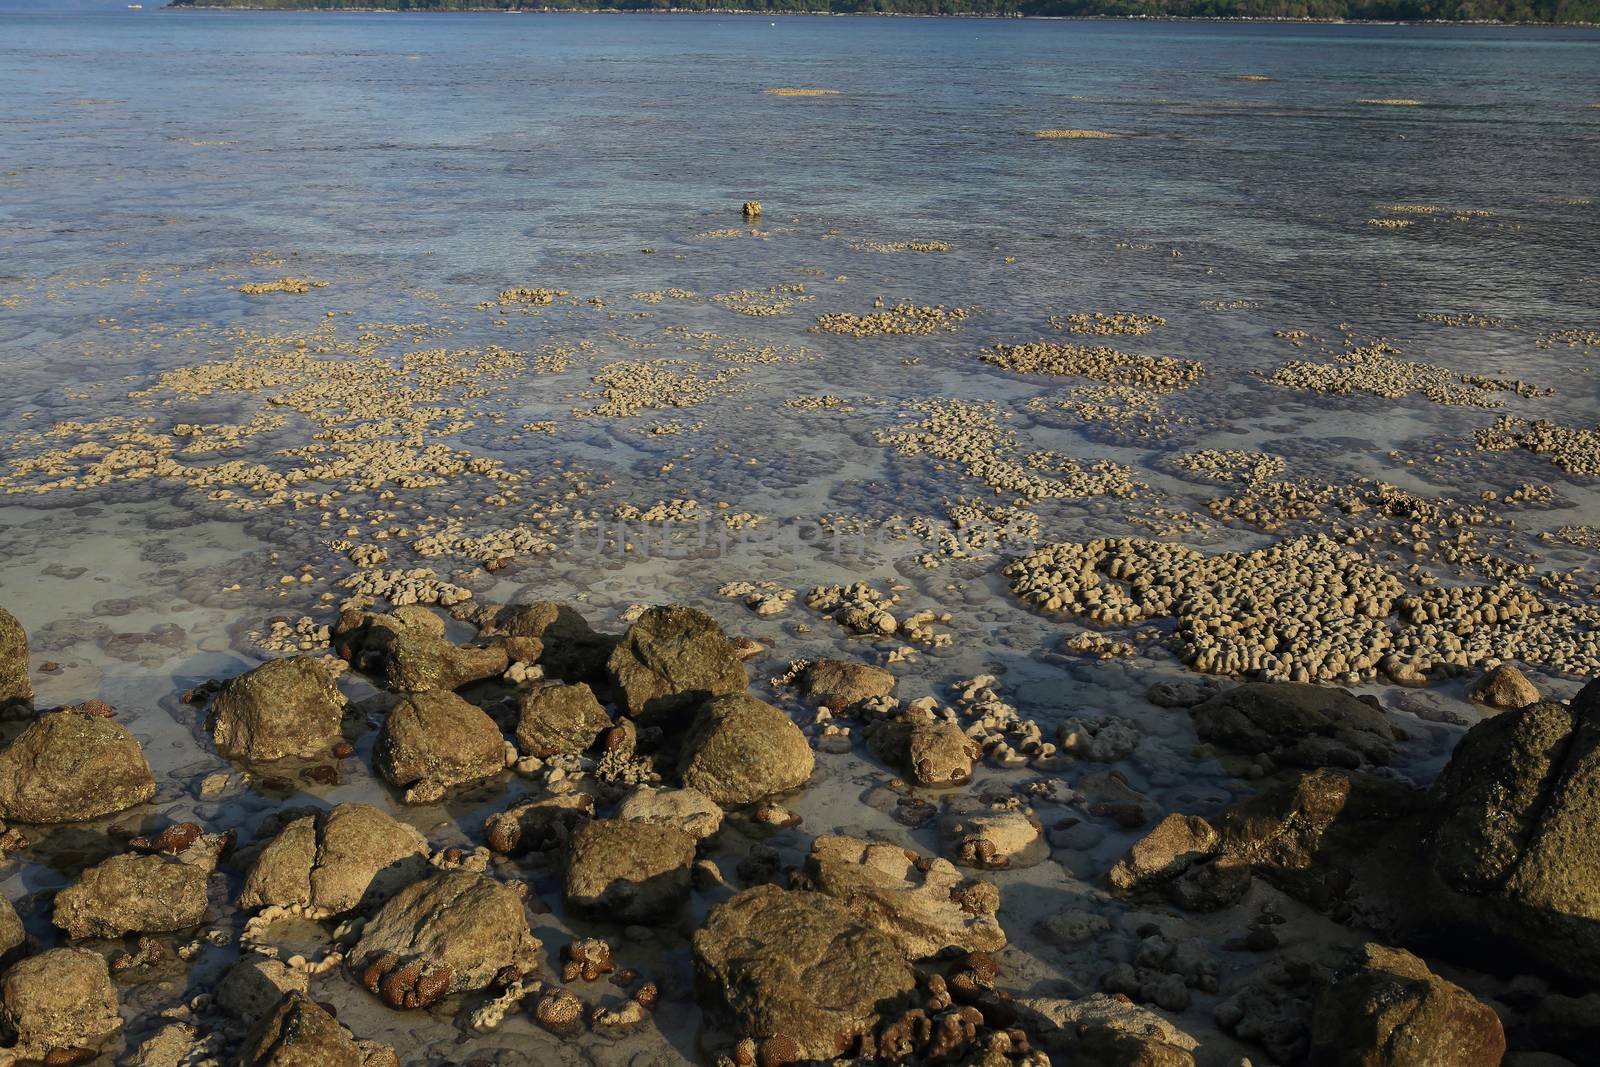 Corals in shallow waters during low tide off the coast of Lipe, Thailand.